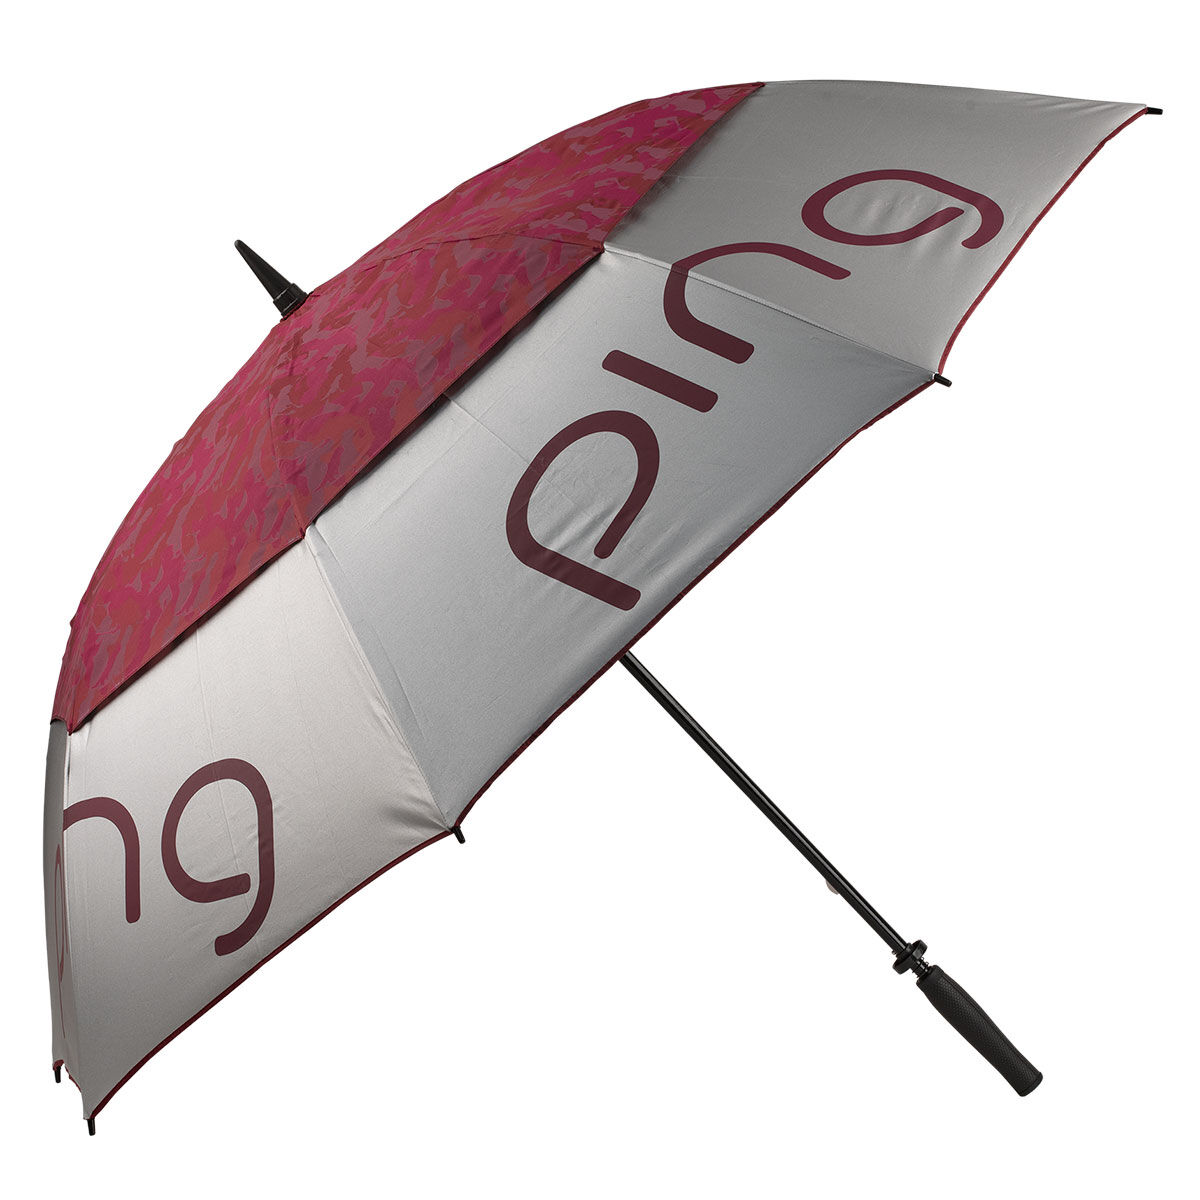 Ping Silver and Dark Red Umbrella, Size: 62" | American Golf von Ping